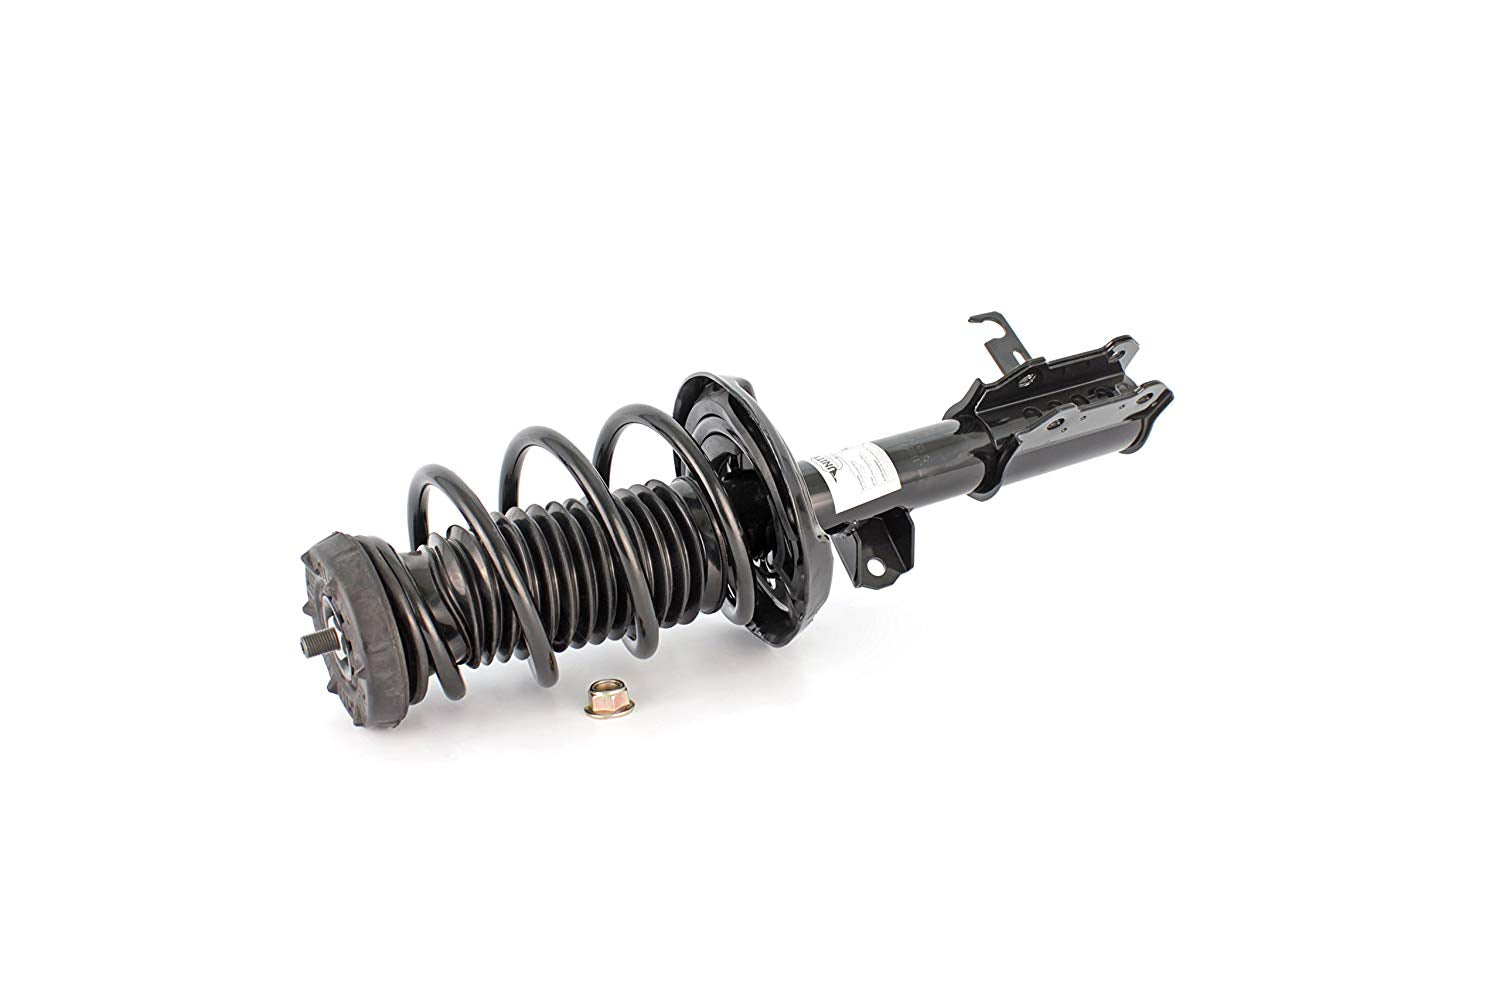 Unity 11882 Front Right Complete Strut Assembly